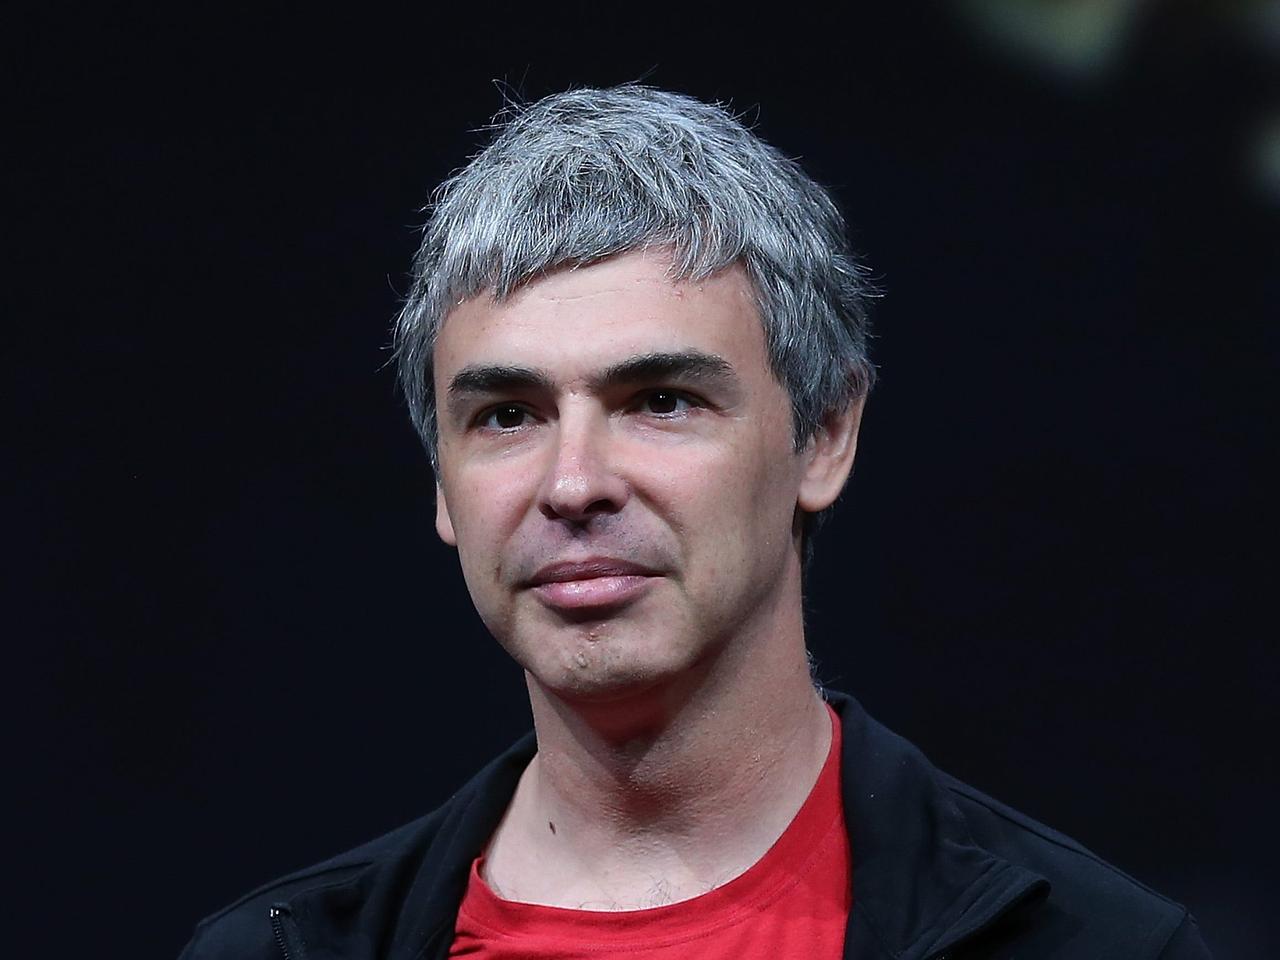   Google co-founder and CEO Larry Page speaks during the opening keynote at the Google I/O Developer Conference in San Francisco on May 15, 2013.